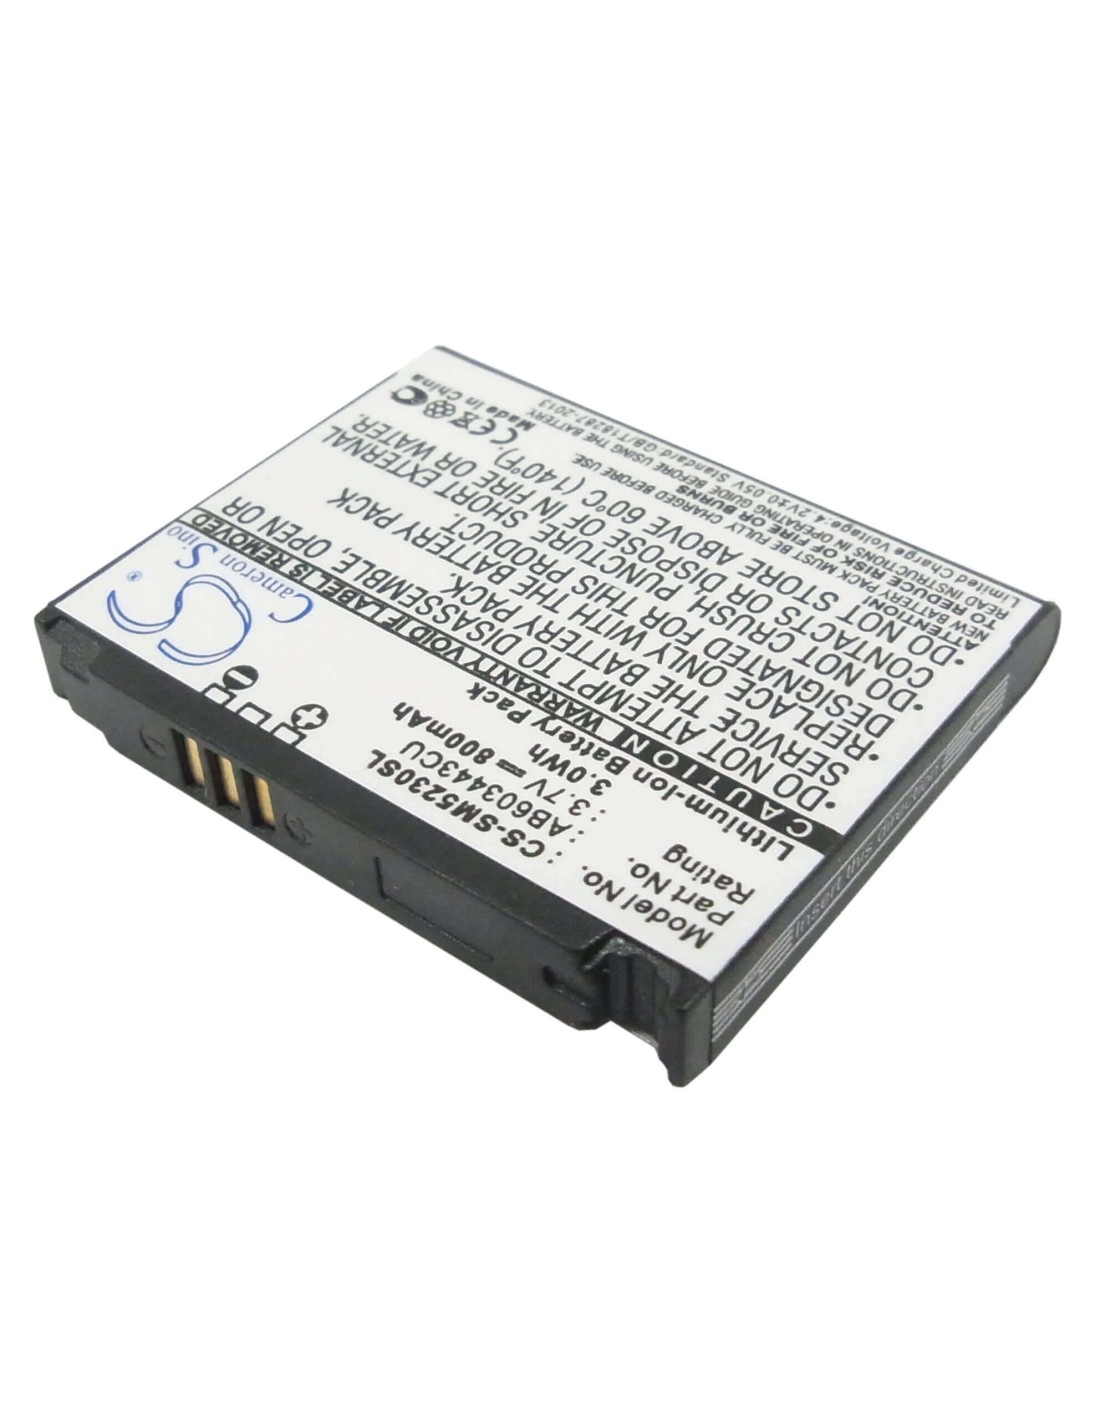 Battery for Samsung SGH-S5230, SGH-S5230 Tocco Lite, SGH-S5230 Tocco Lite Edition 3.7V, 800mAh - 2.96Wh